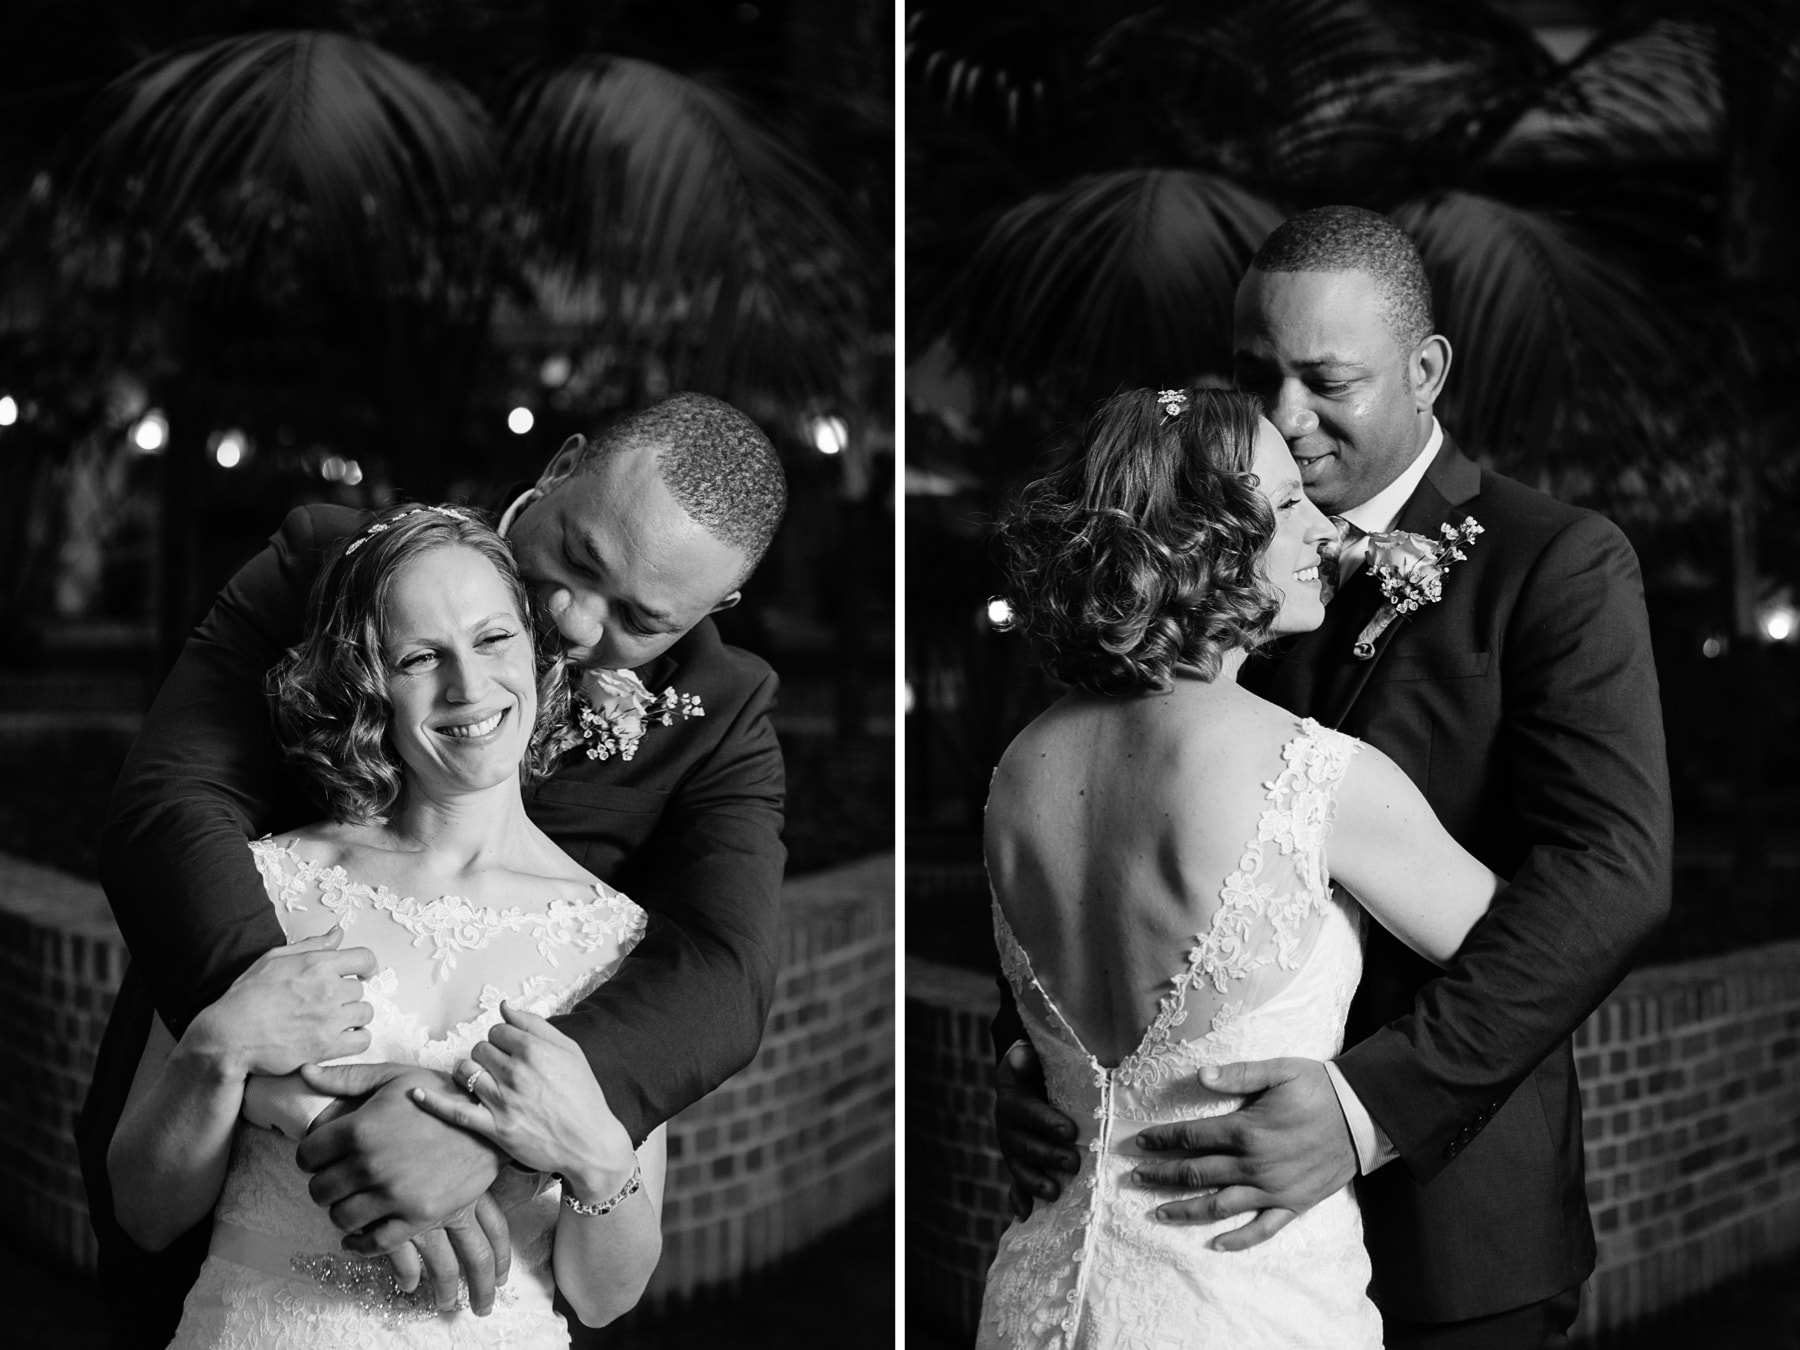 Jane and Ike's wedding at The Living Room in Boston, MA | Kelly Benvenuto Photography | Boston wedding photographer